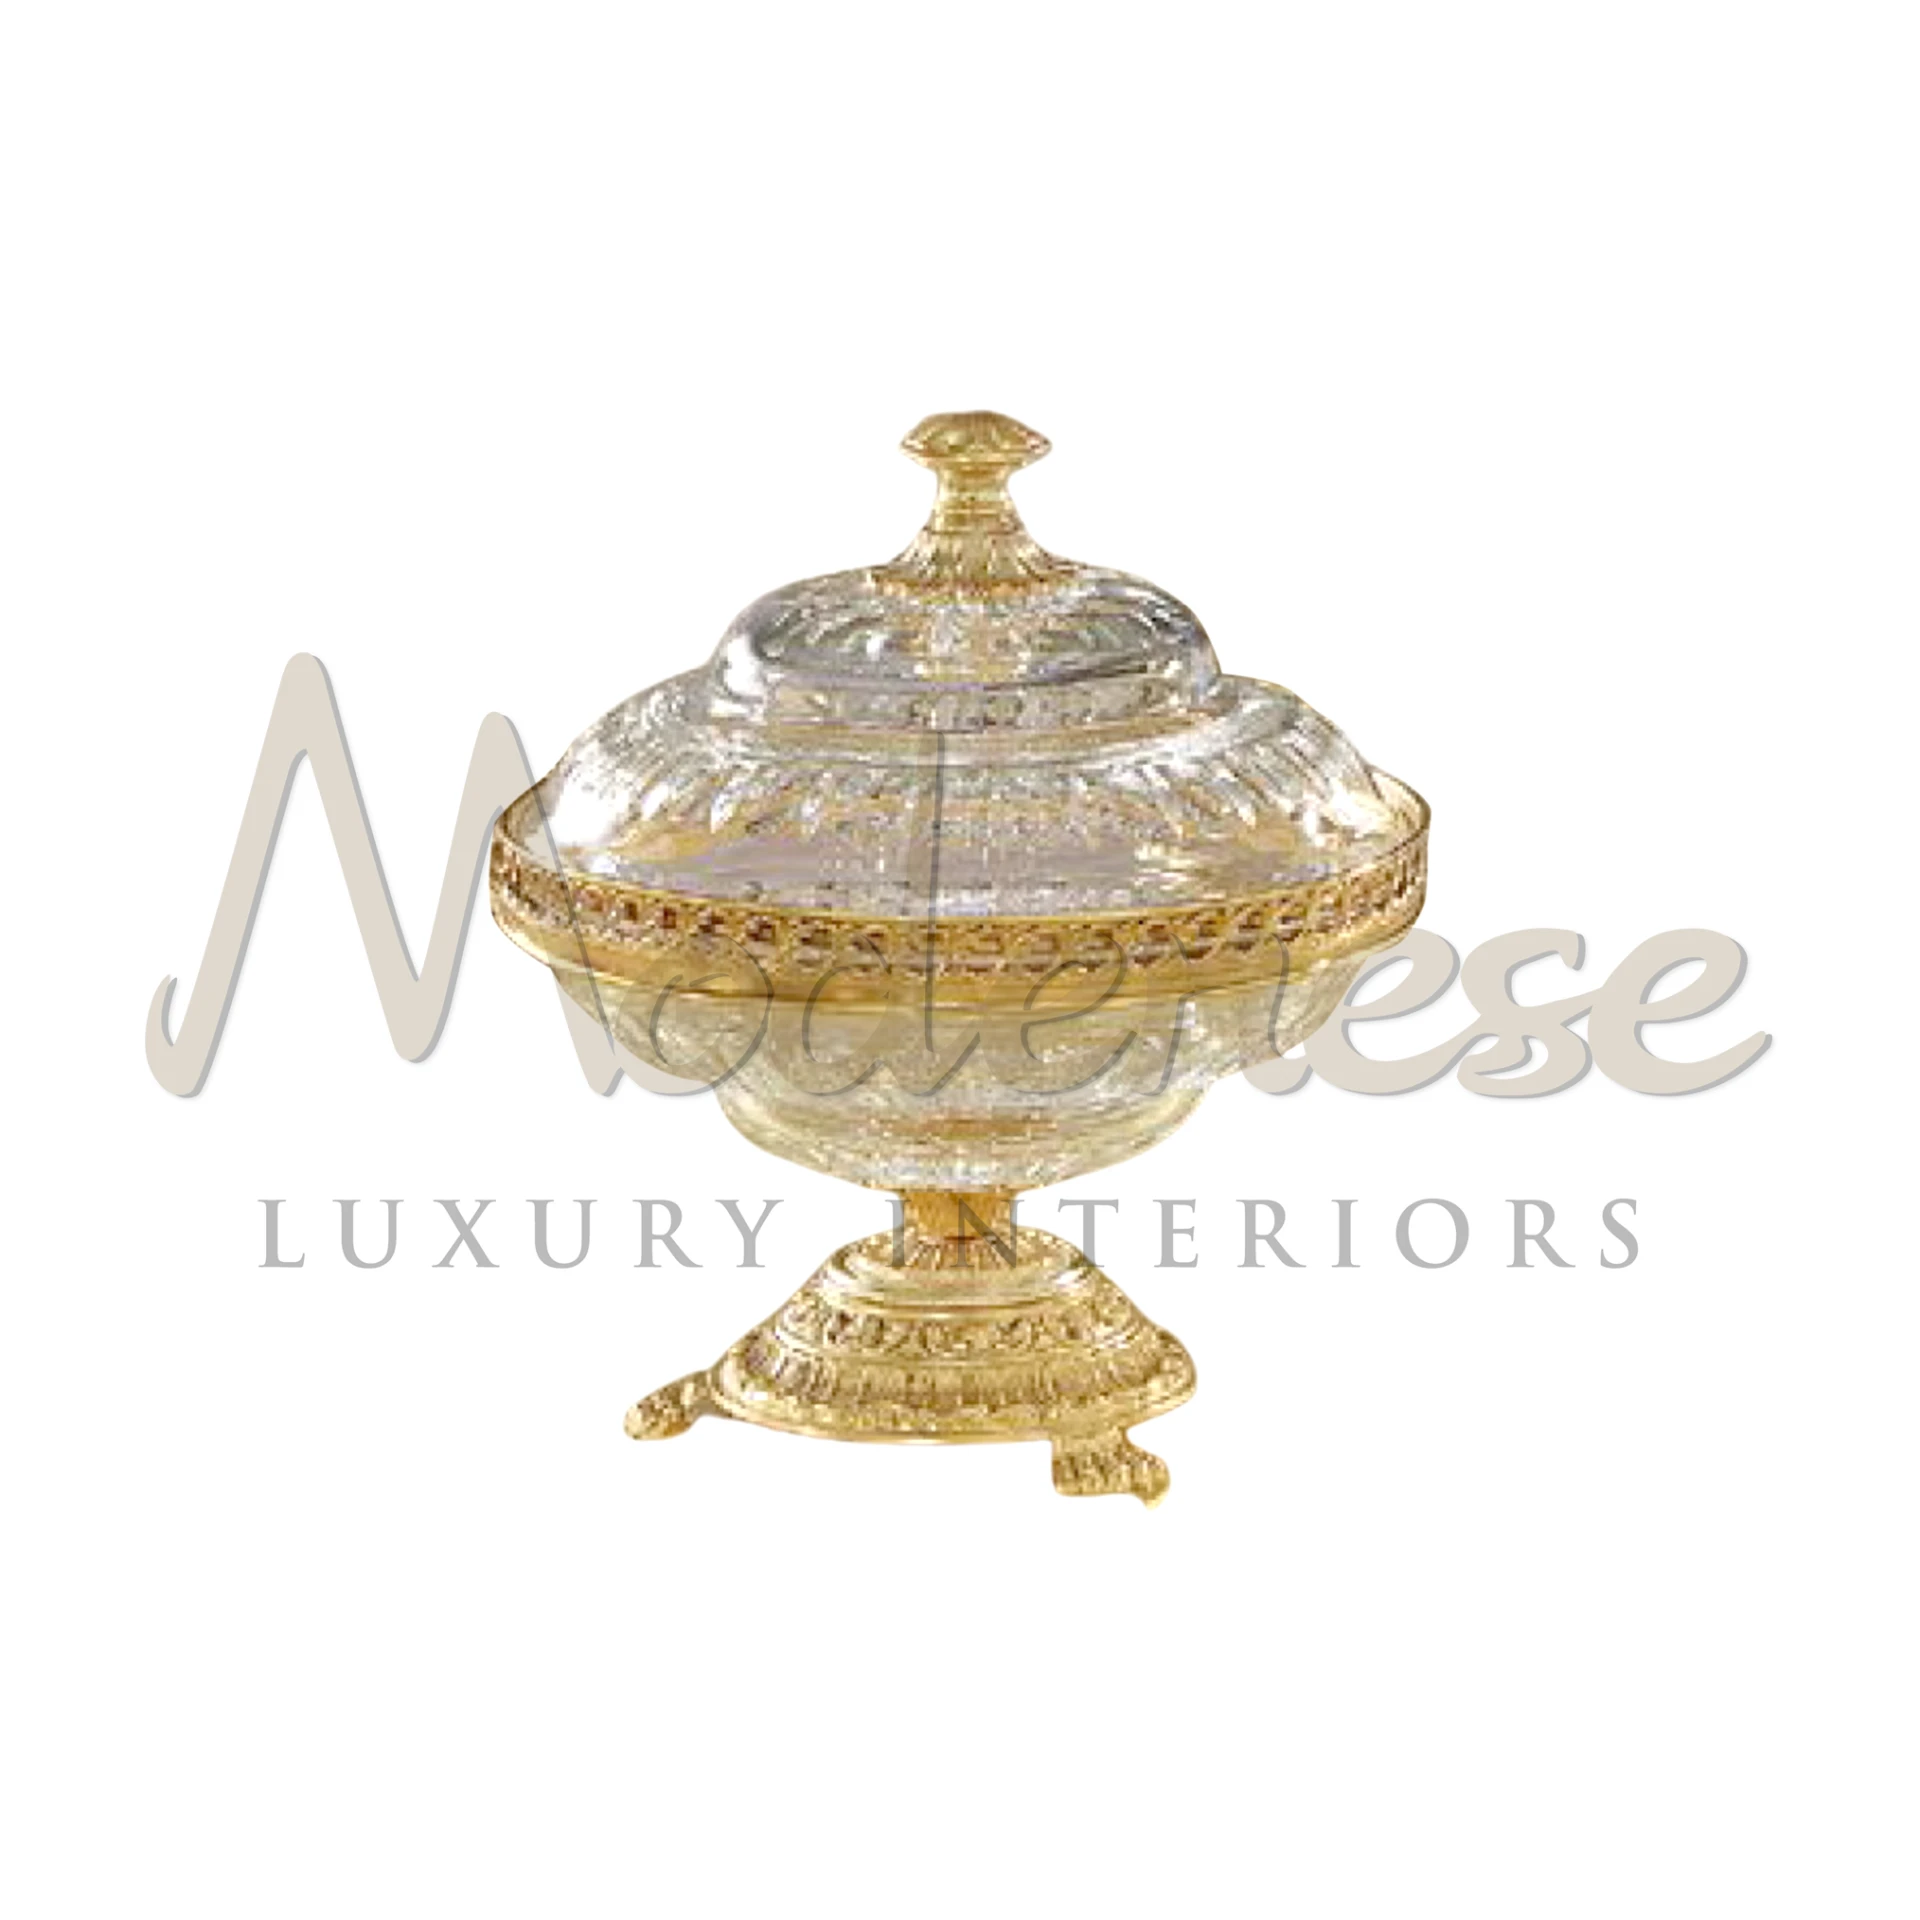 Victorian Style Italian Vase, with intricate floral designs and opulent gold accents, epitomizes classic luxury decor.